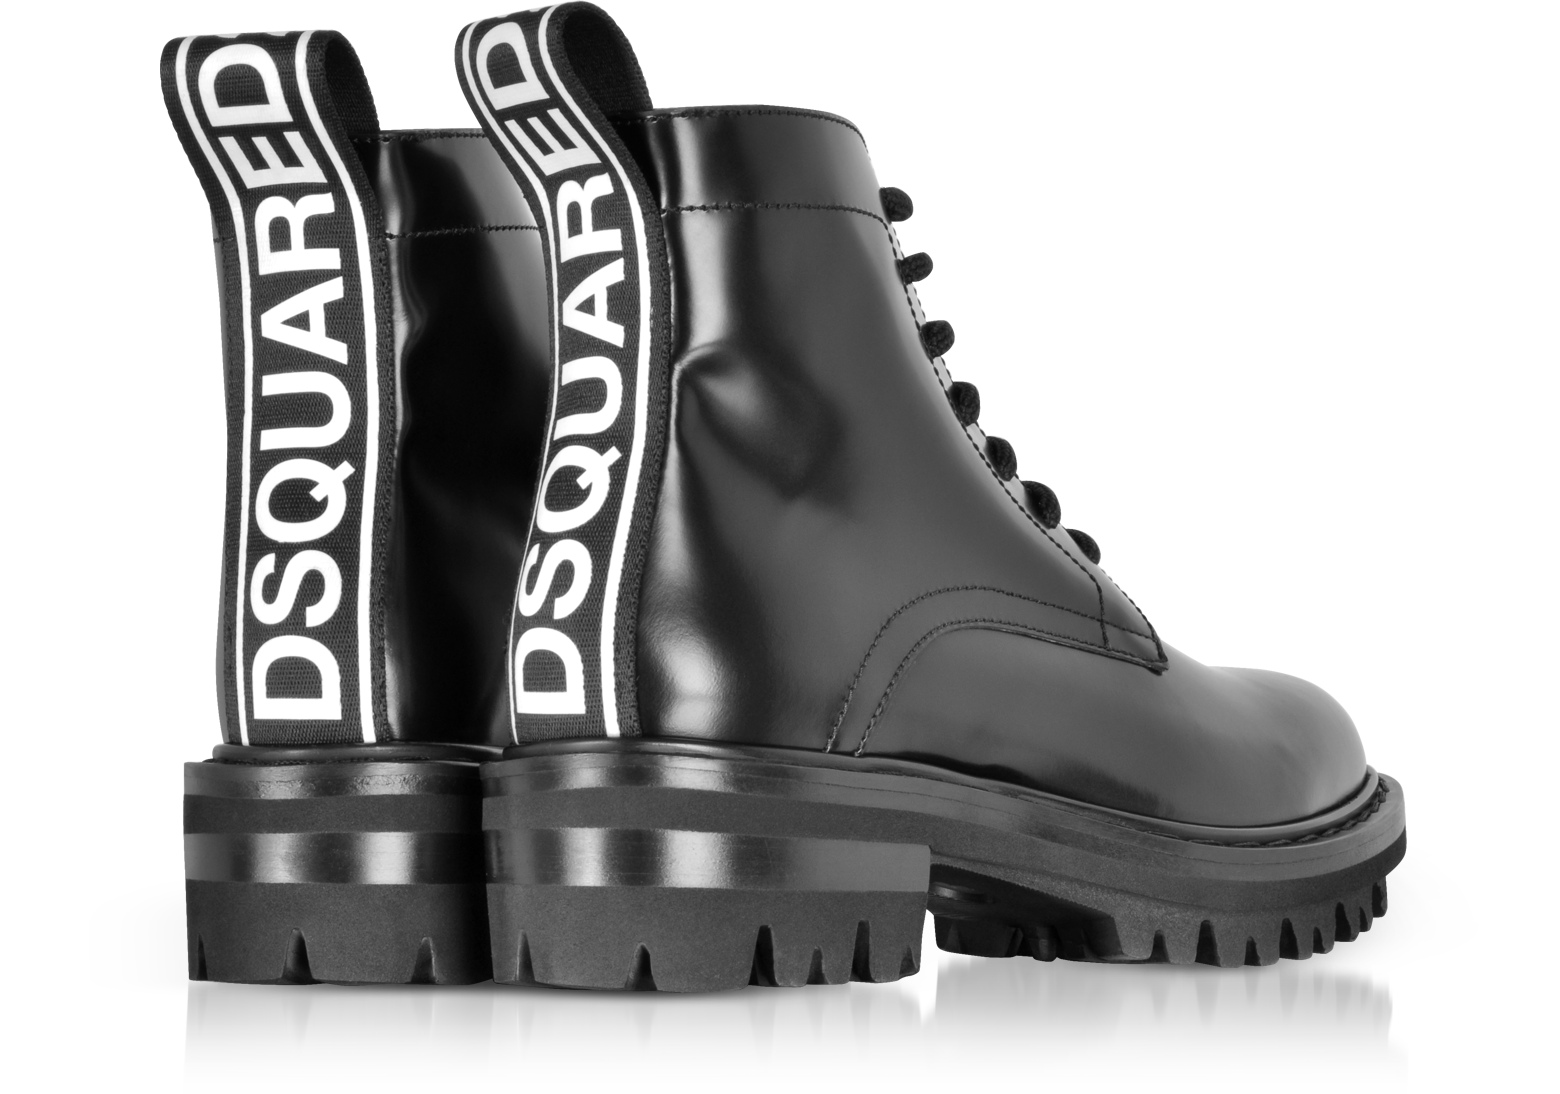 dsquared2 boots